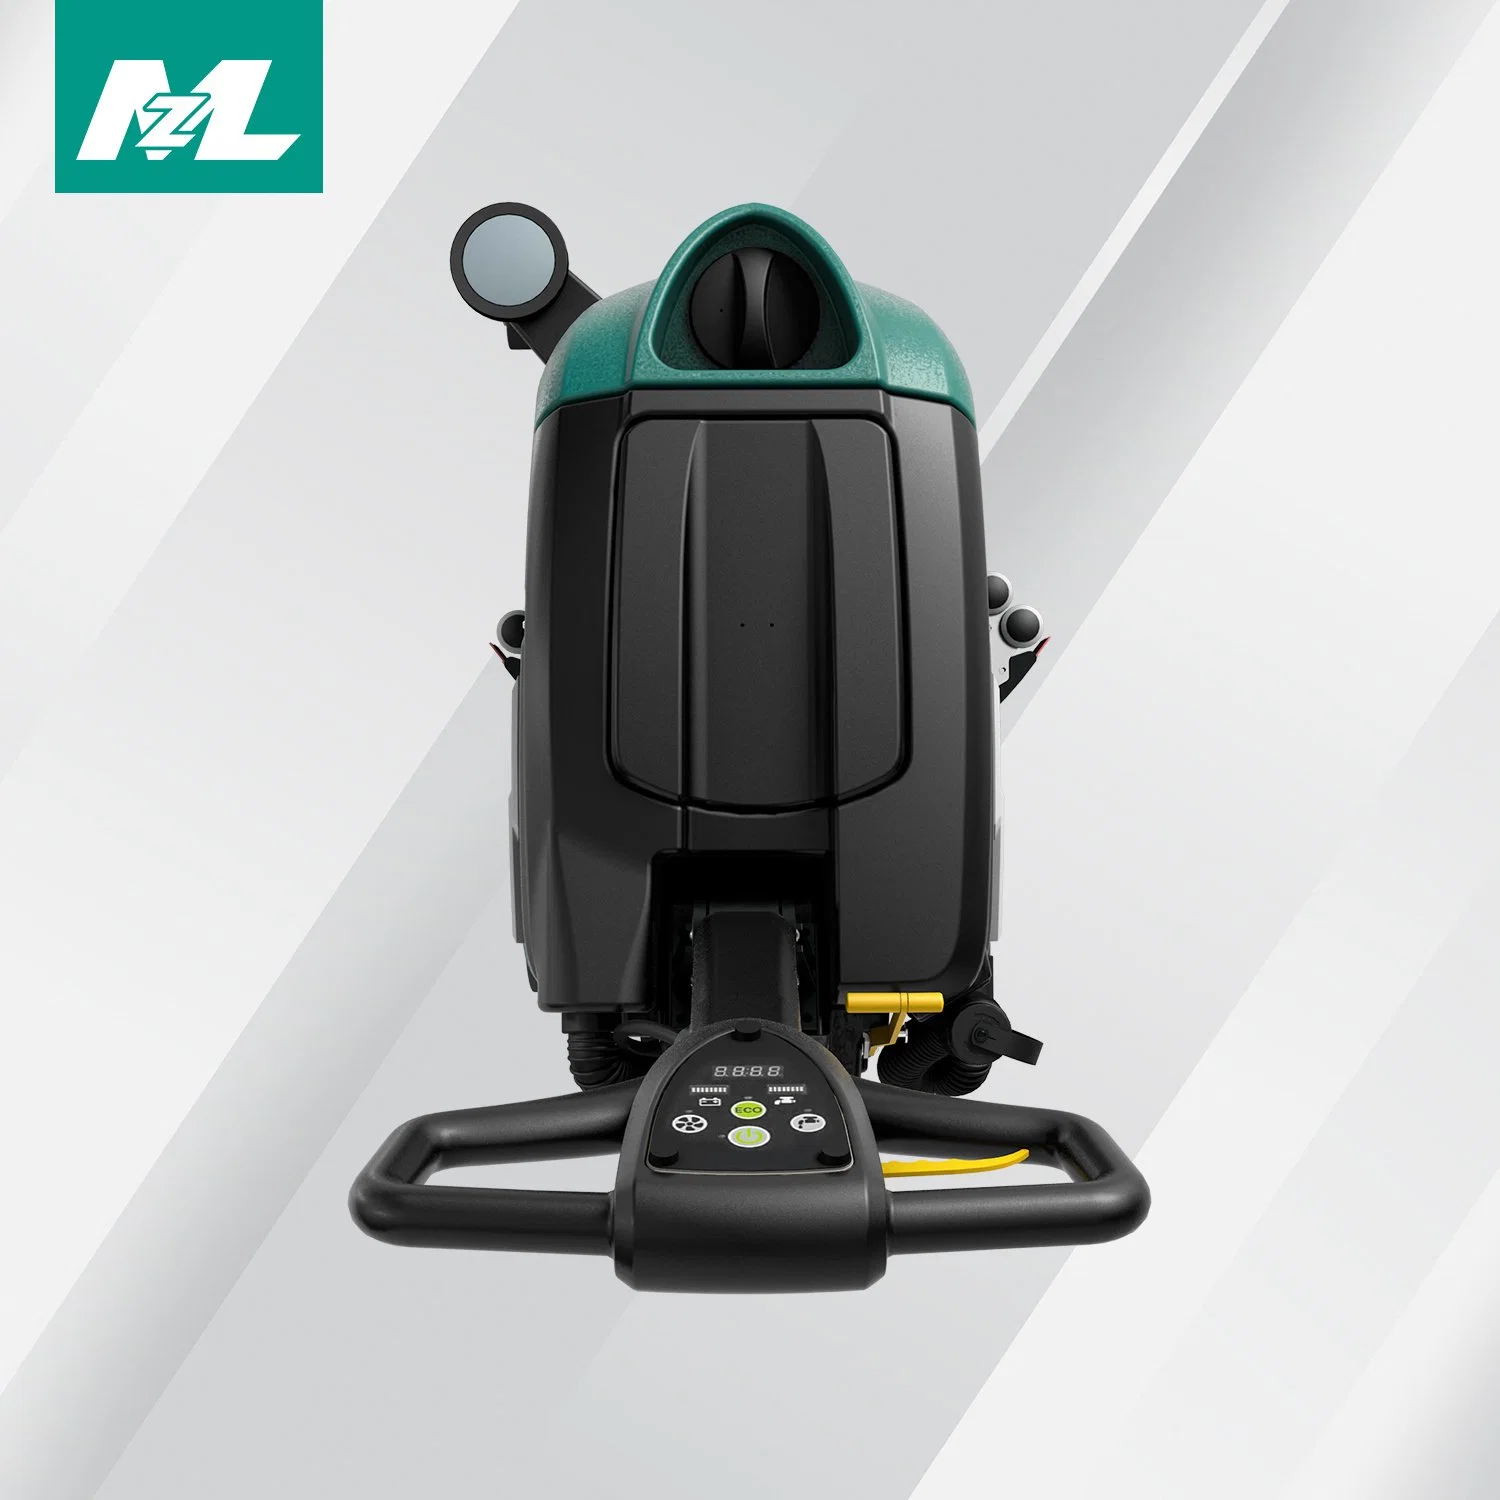 Hand Push Floor Scrubber Cleaning Equipment for Office One-Key to Start